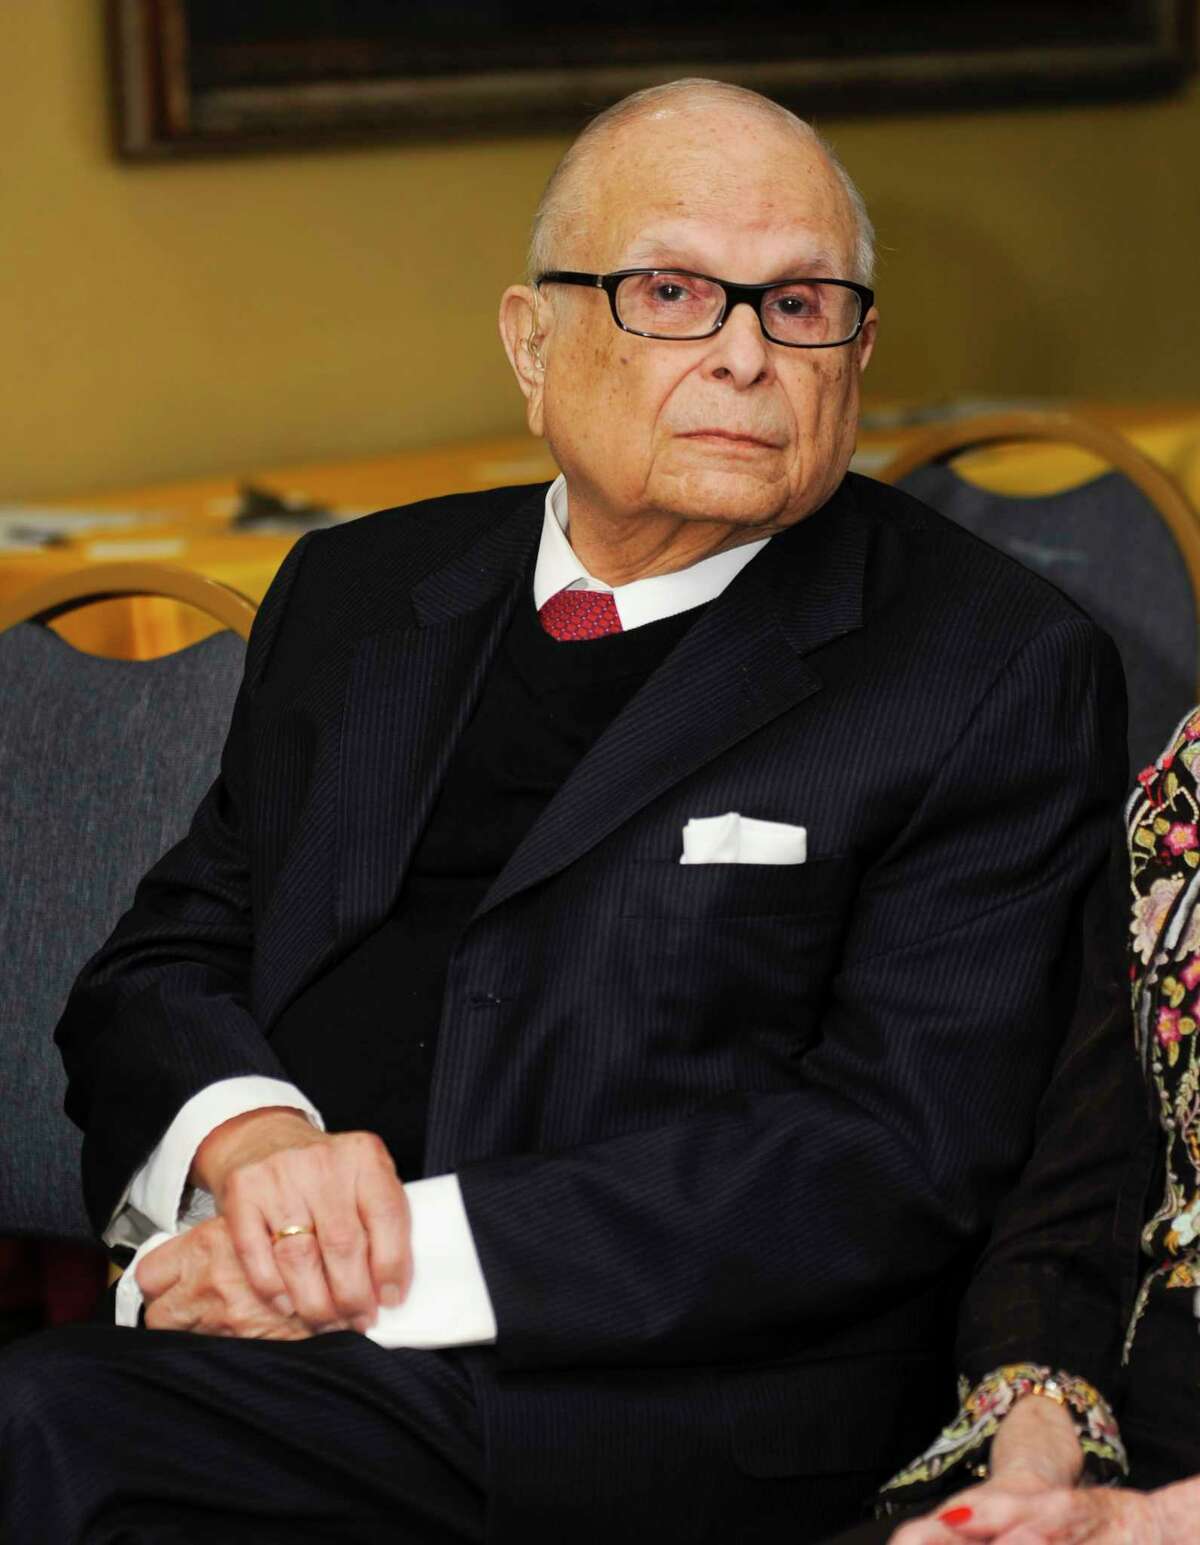 Joaquin Cigarroa Jr., a trailblazing doctor who served the Laredo area for over six decades, has died at the age of 94.